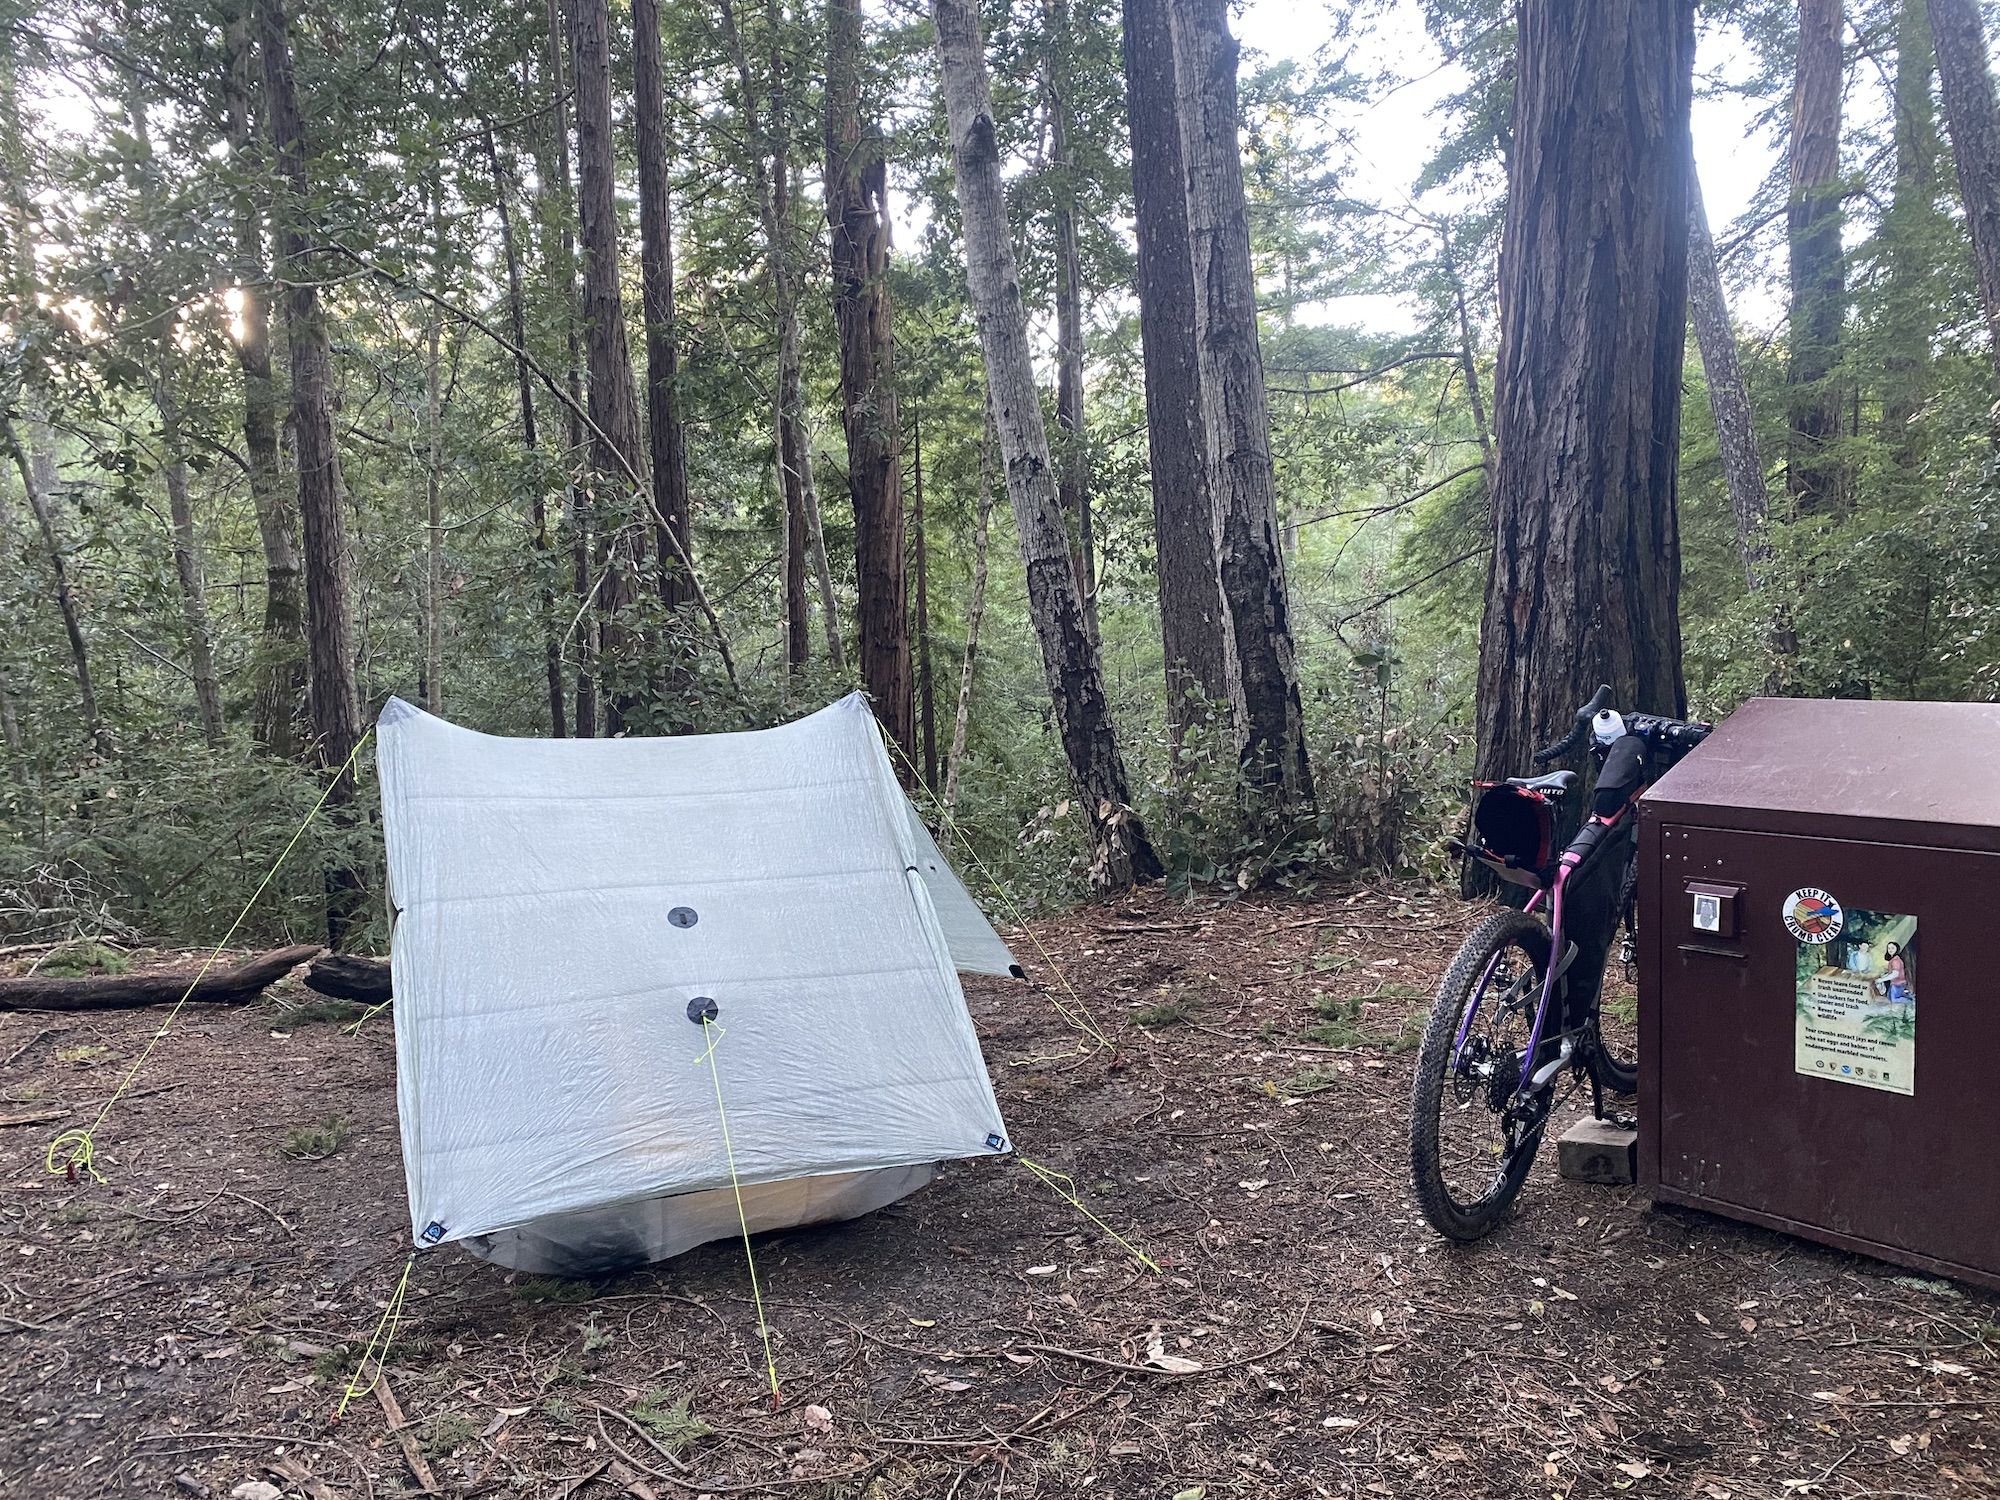 A tent and a bike next to a bear box